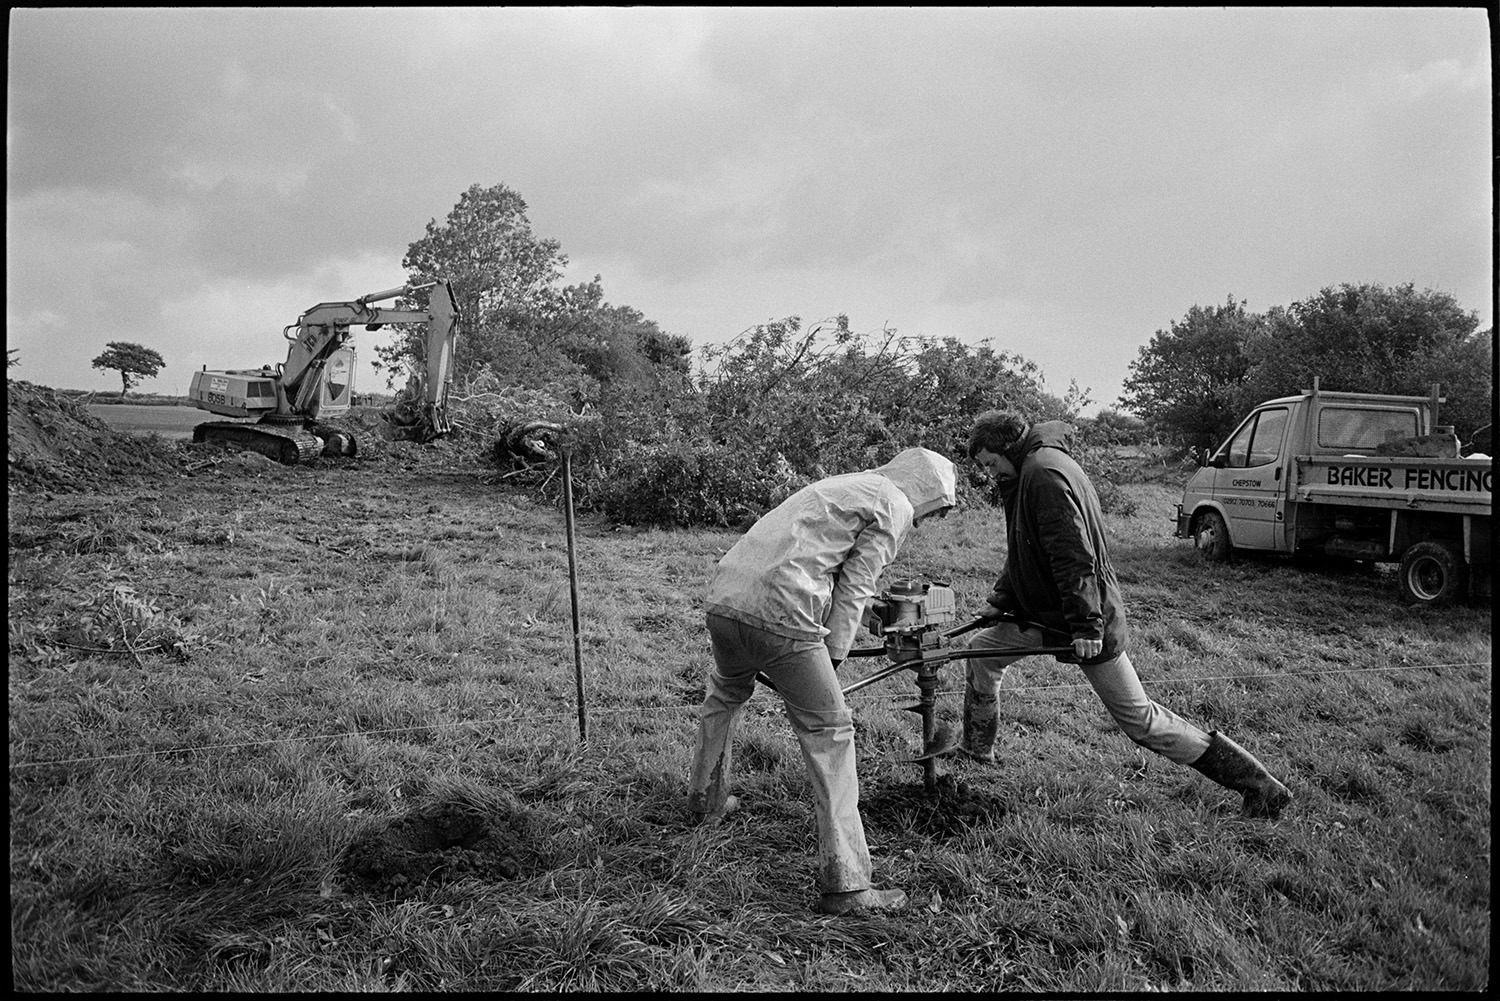 Excavator clearing ground for new school buildings, men drilling.
[Two men using a hole borer on the site of the new primary school at Chulmleigh. A mechanical digger is clearing a hedge in the background, alongside a vehicle belonging to Baker Fencing.]